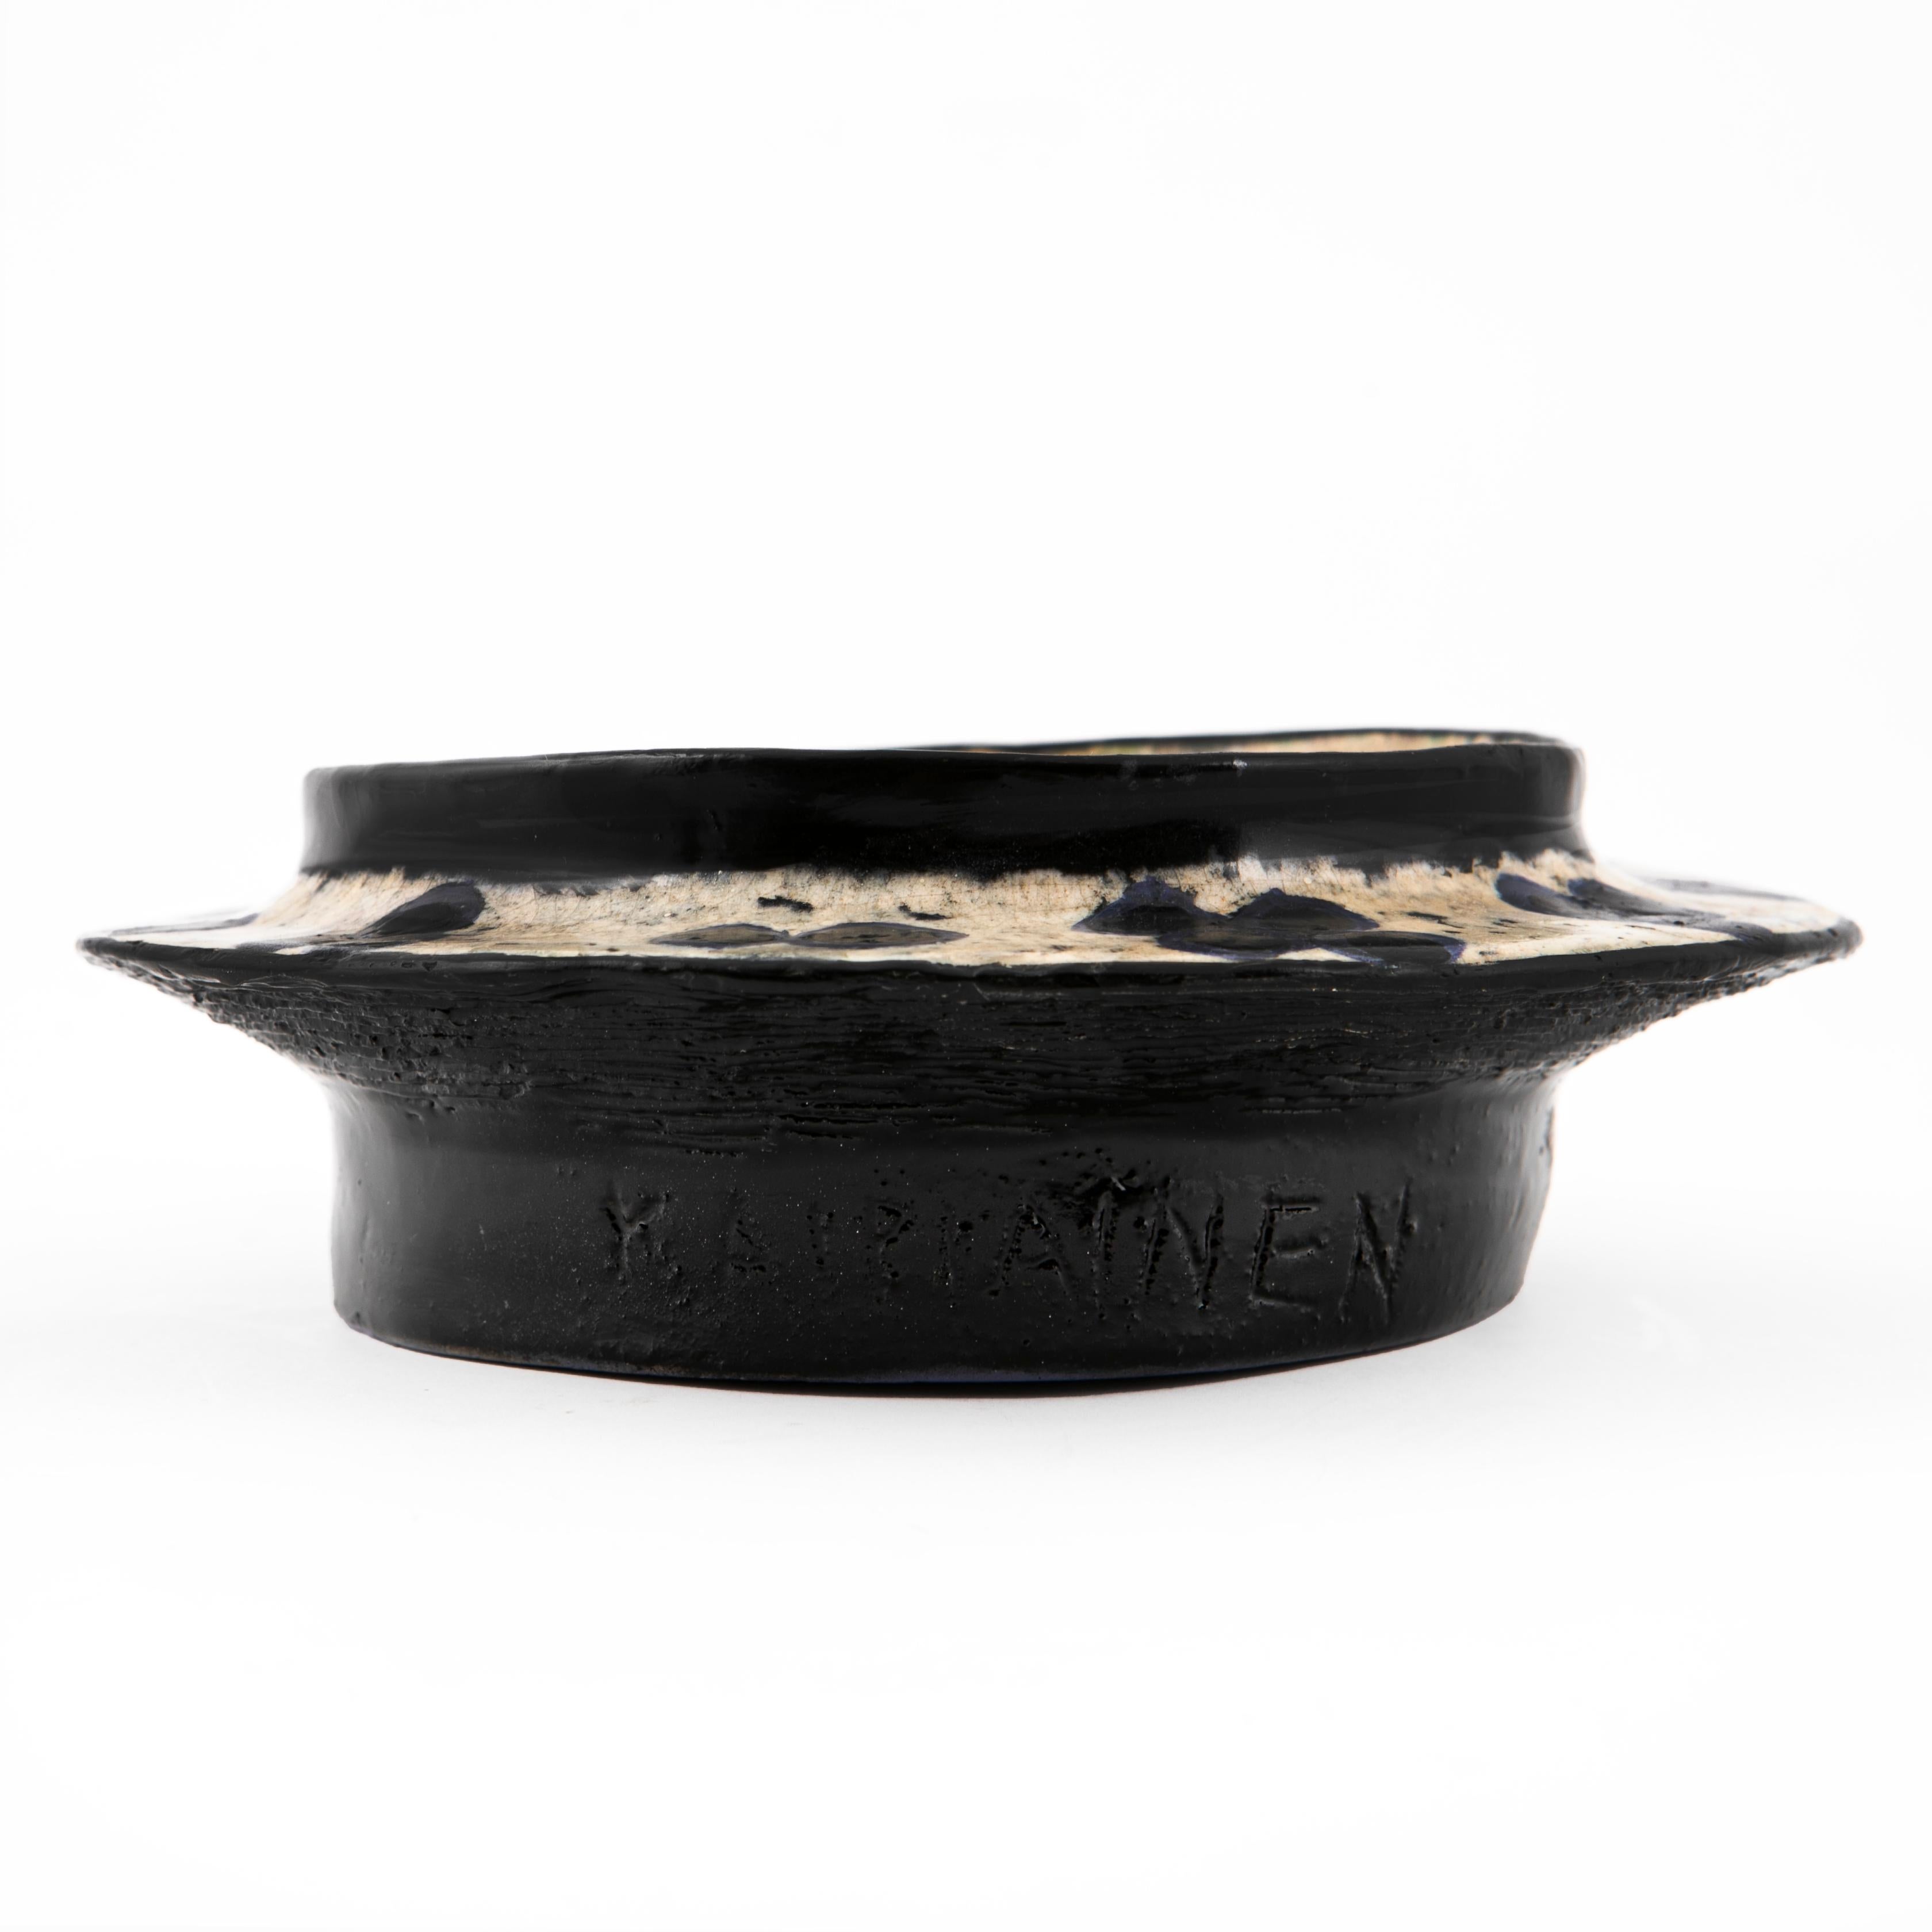 Birger Kaipiainen (1915 – 1988).
Small one of a kind stoneware bowl decorated with purple and black grapes on a ivory glazed base. Lower part of the bowl with black glaze and flutings / grooves. Signed Kaipiainen. Bottom with light purple